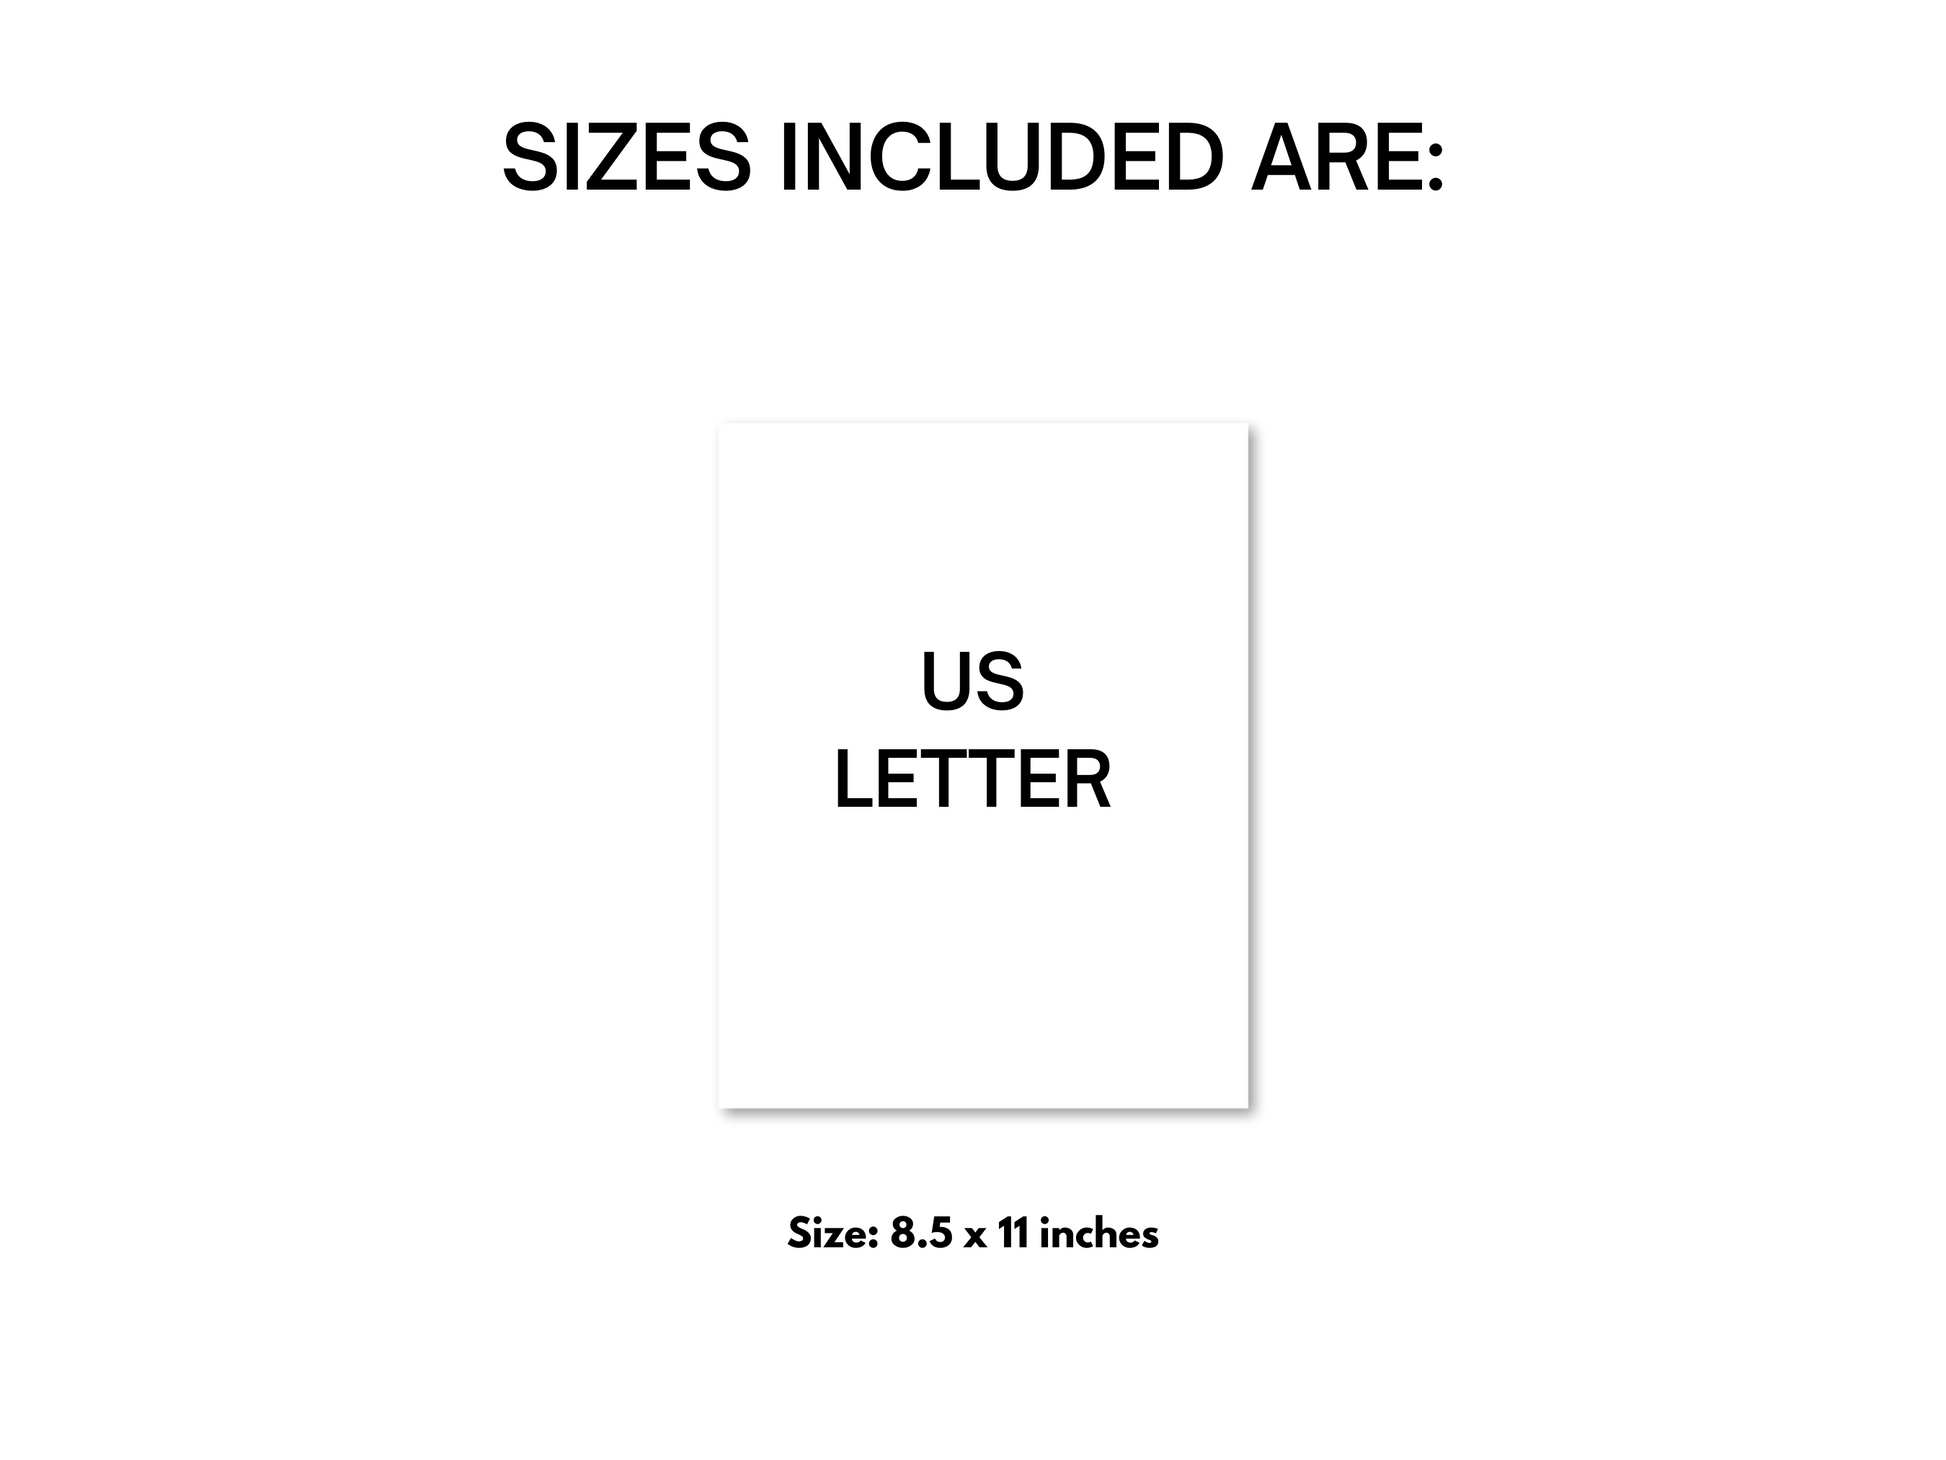 Statement on size, US Letter